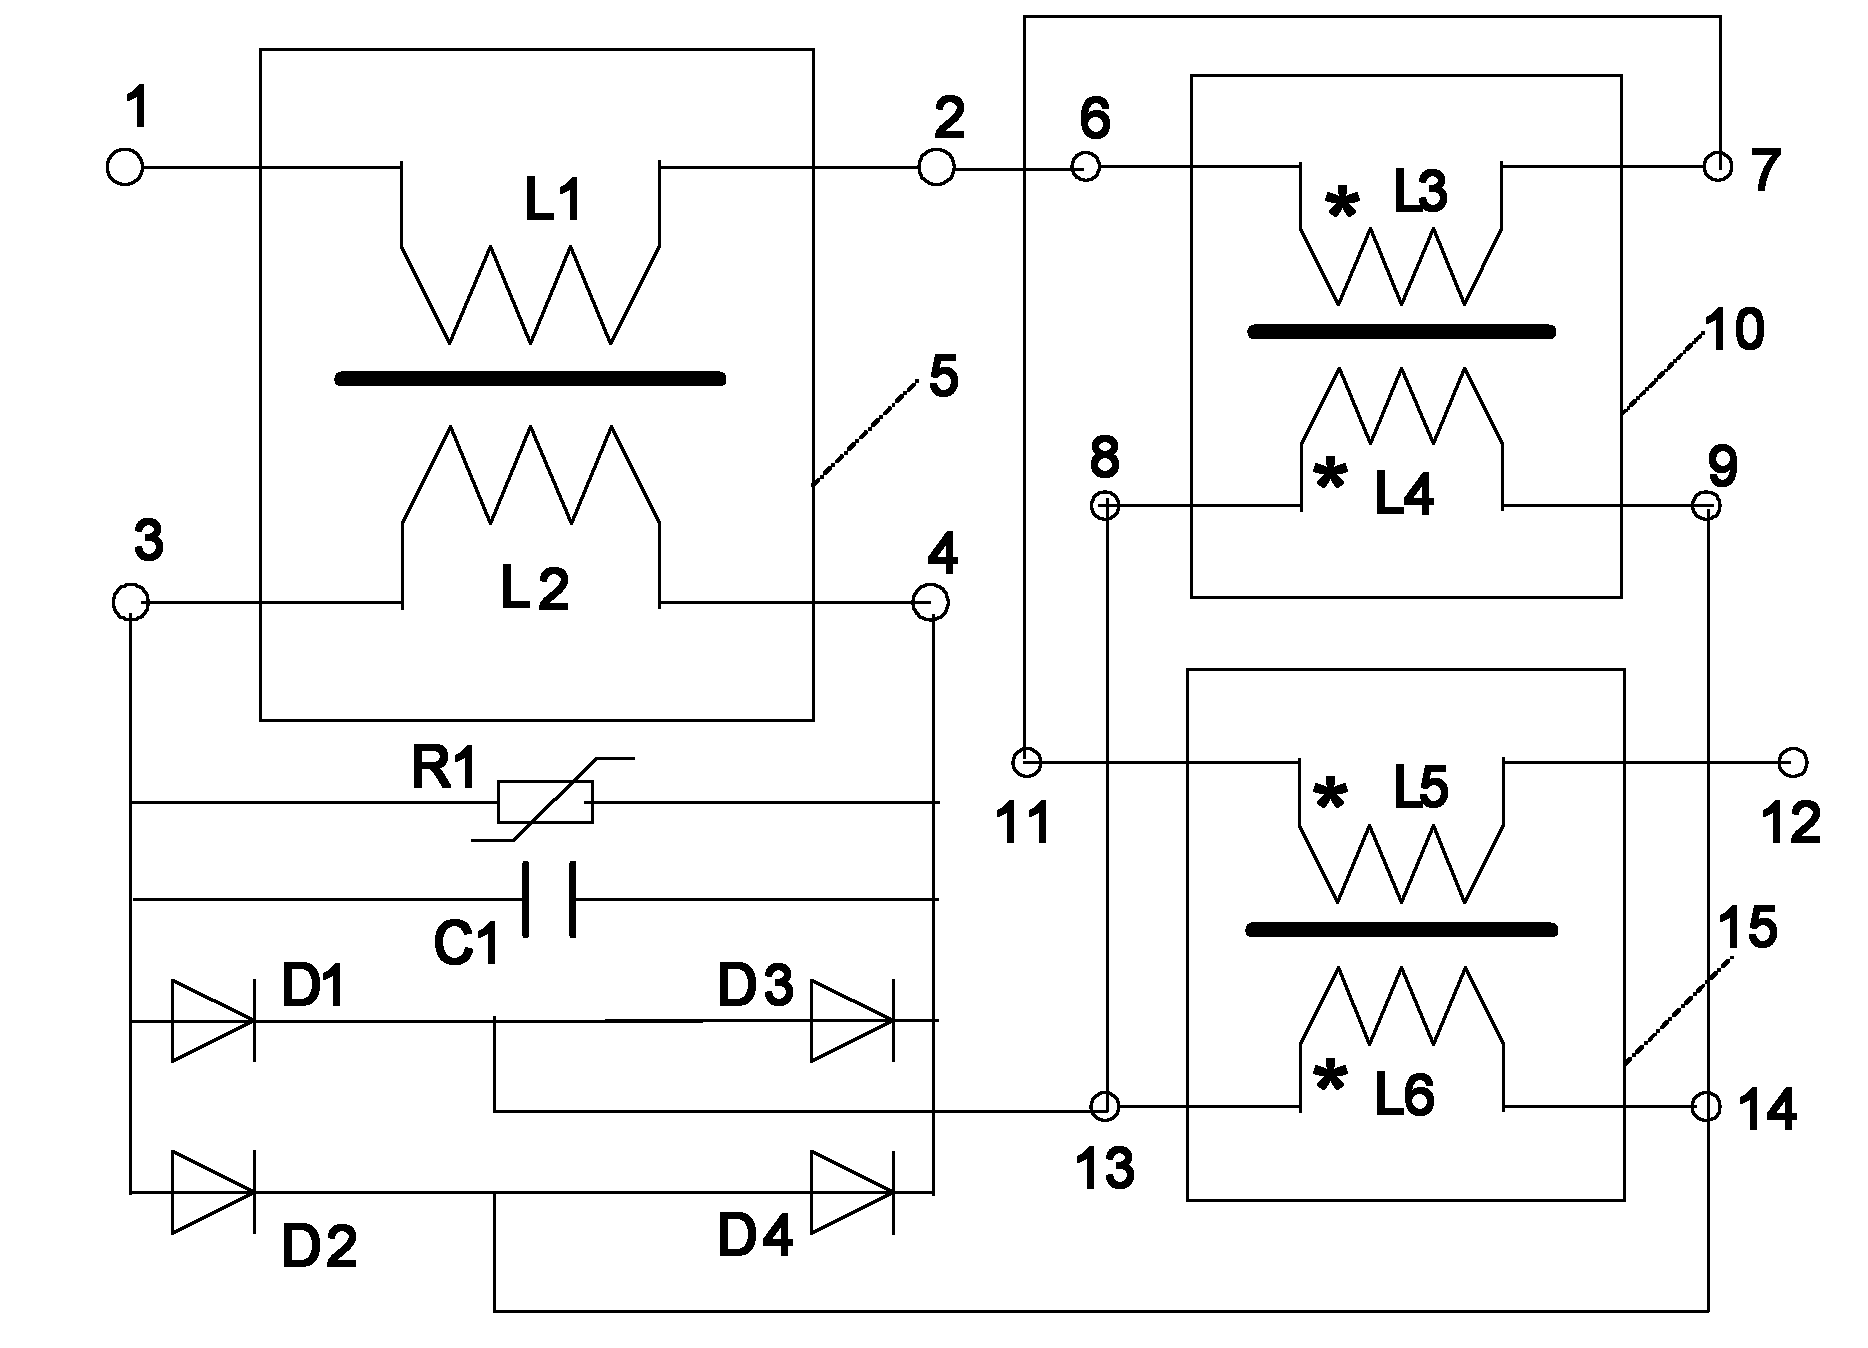 Short circuit current limiter controlled by current transformers